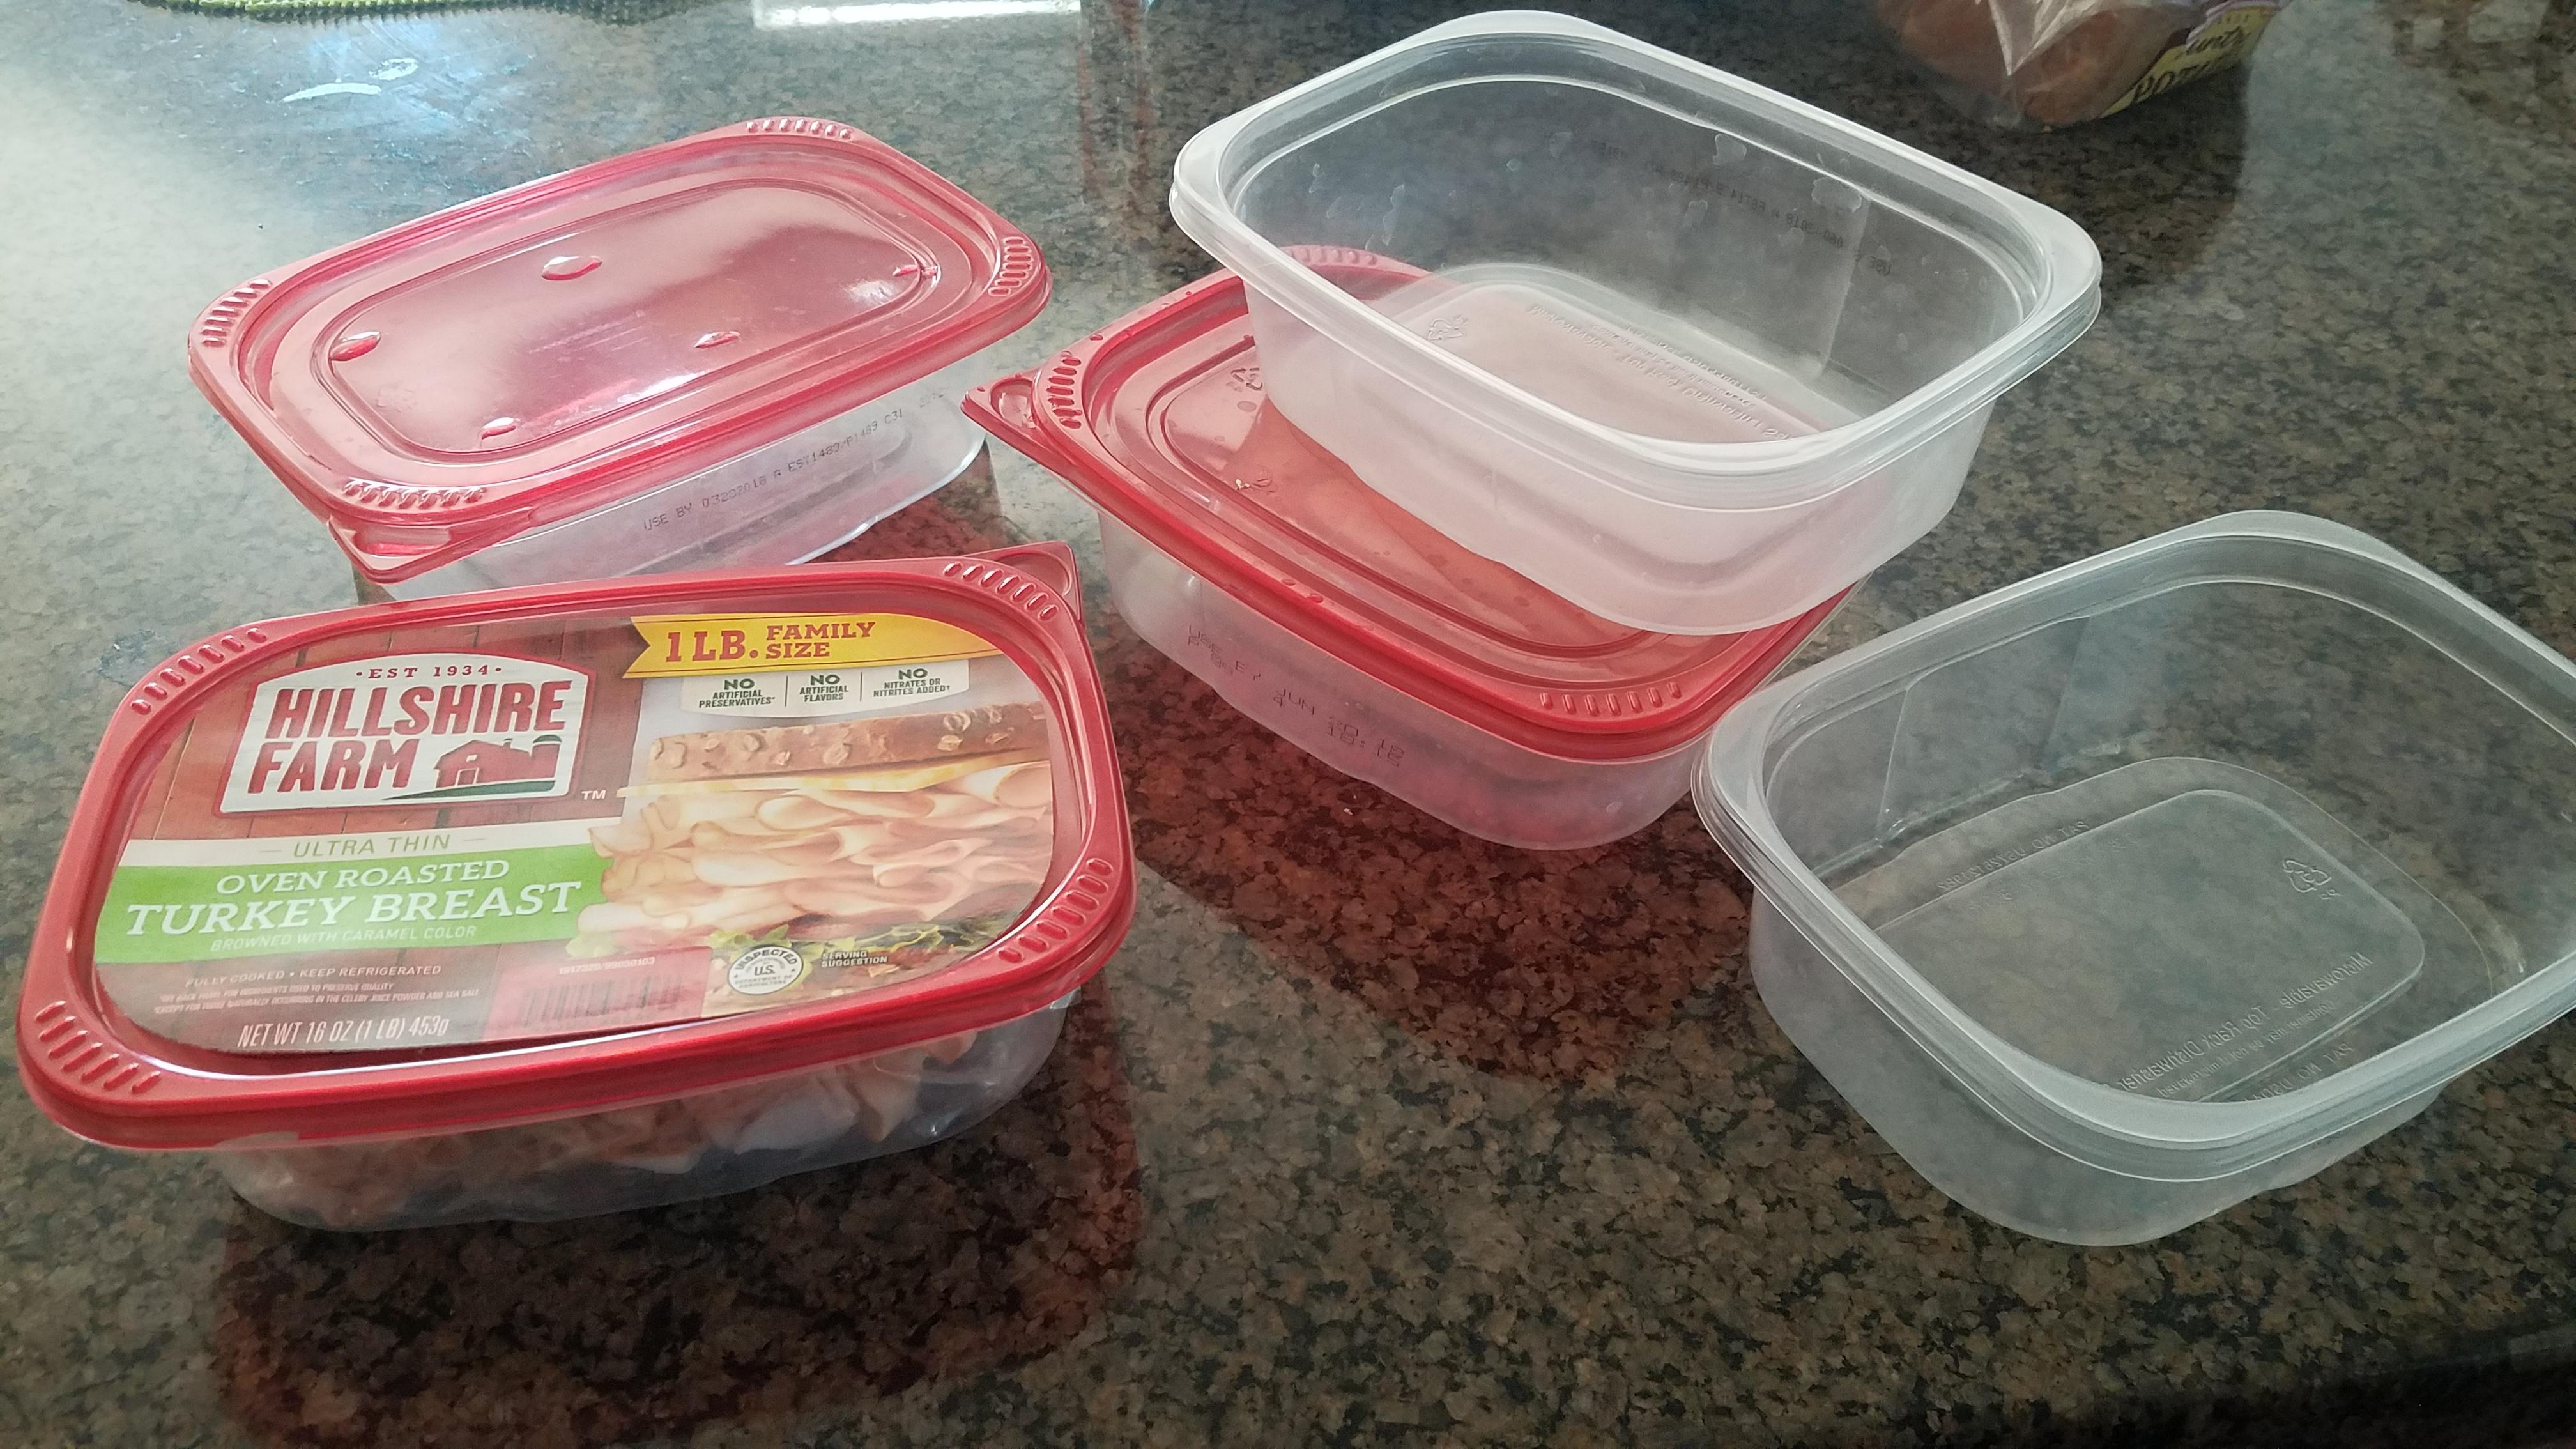 Rumpke Waste & Recycling on X: Ever wonder whether lunch meat containers  can be recycled? The answer is YES! Place the lid back on that container  and toss it into your recycling